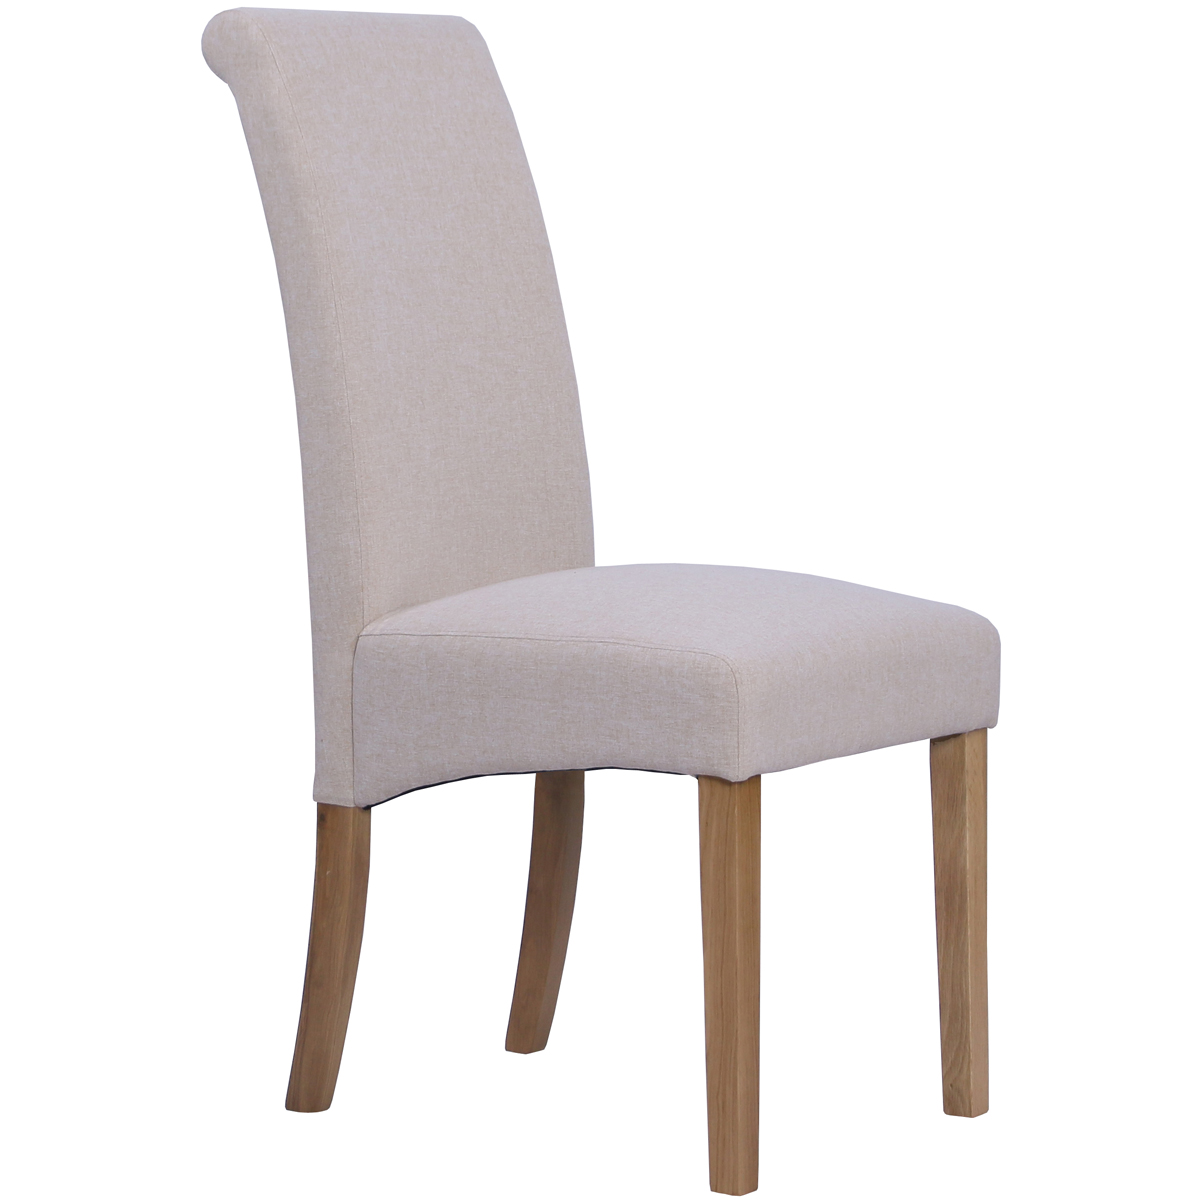 New Oak WES002 Dining Chair